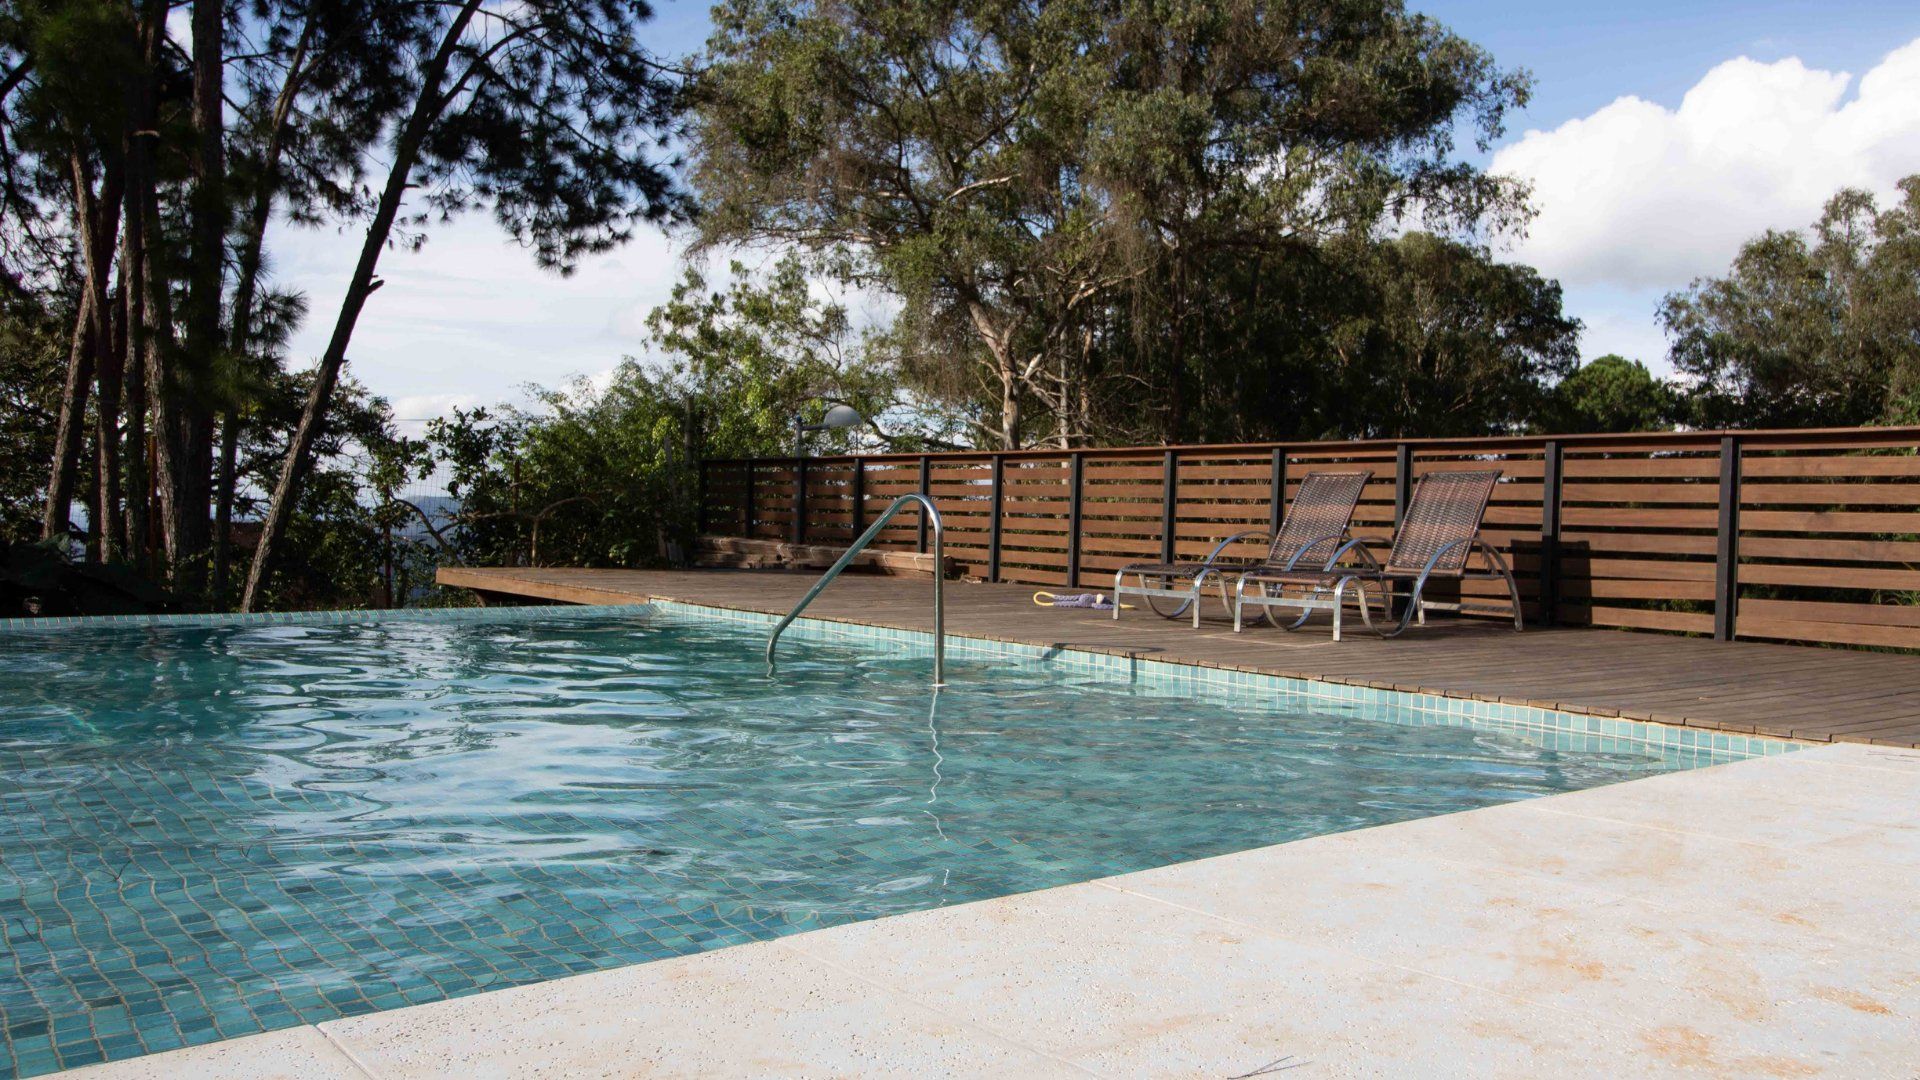 Picture of a pool surrounded by a wooden fence and concrete pool deck.